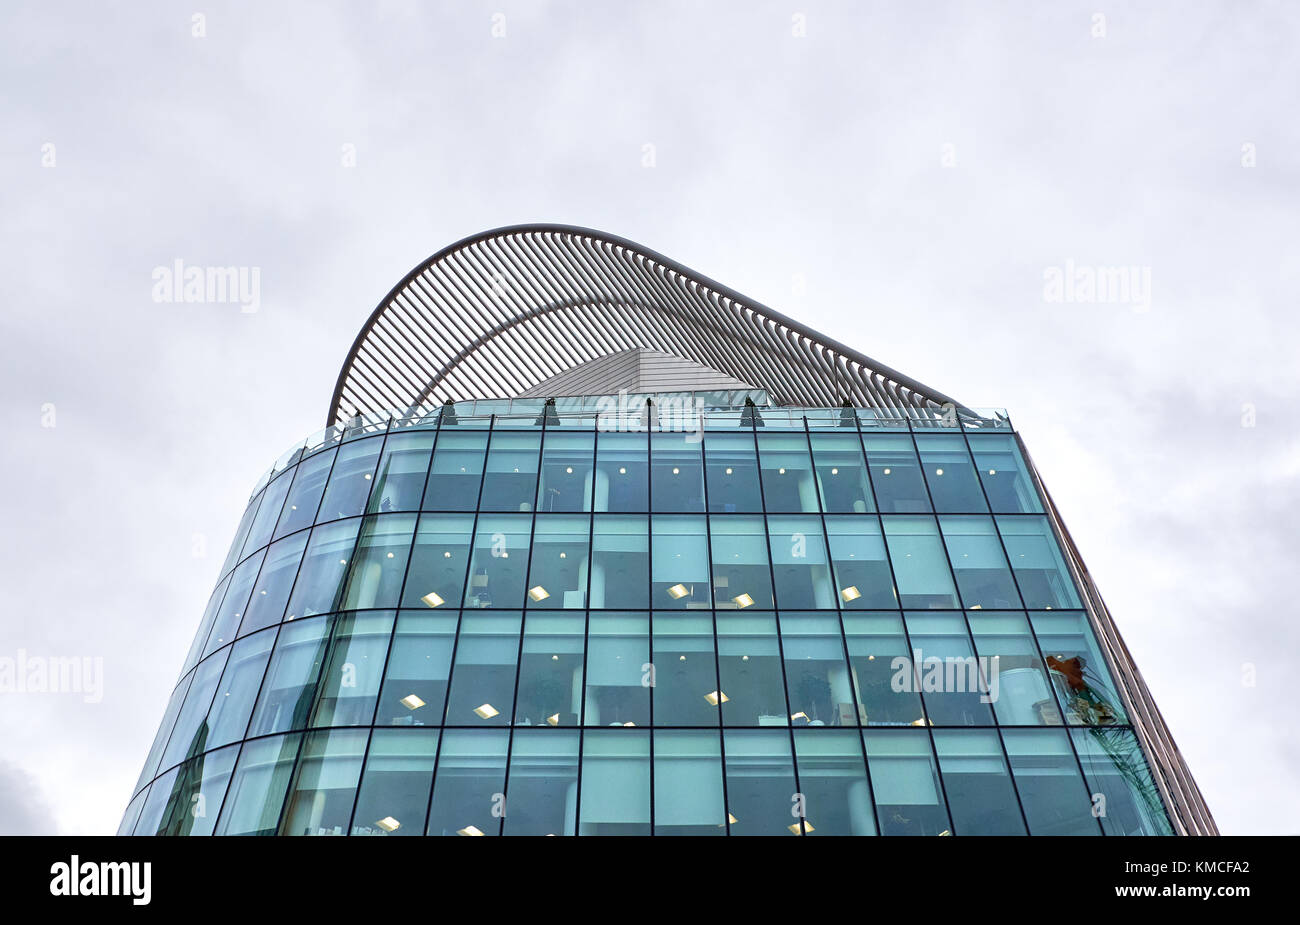 LONDON CITY - DECEMBER 23, 2016: The wavy roof top of a modern highrise building on Vauxhall Bridge road near Victoria Station Stock Photo